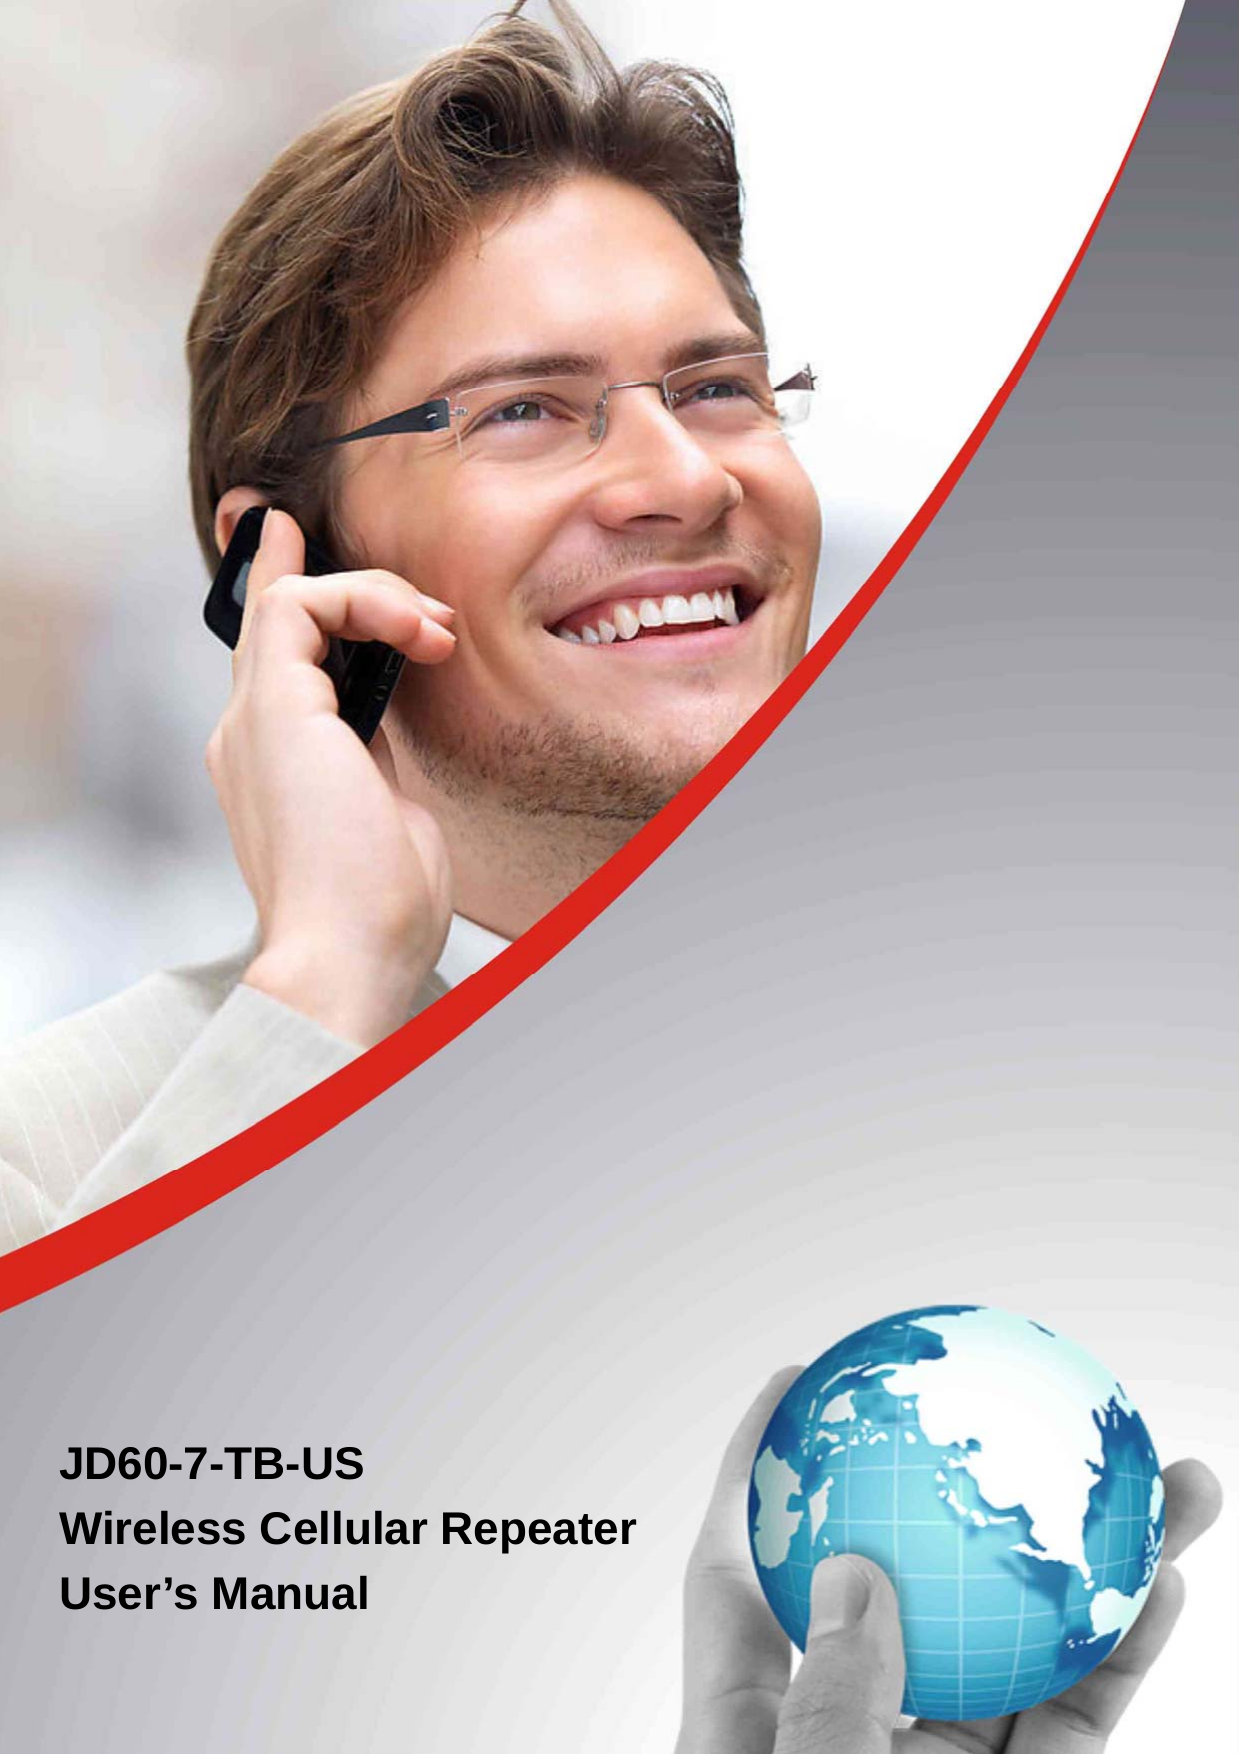                       JD60-7-TB-US  Wireless Cellular Repeater   User’s Manual  